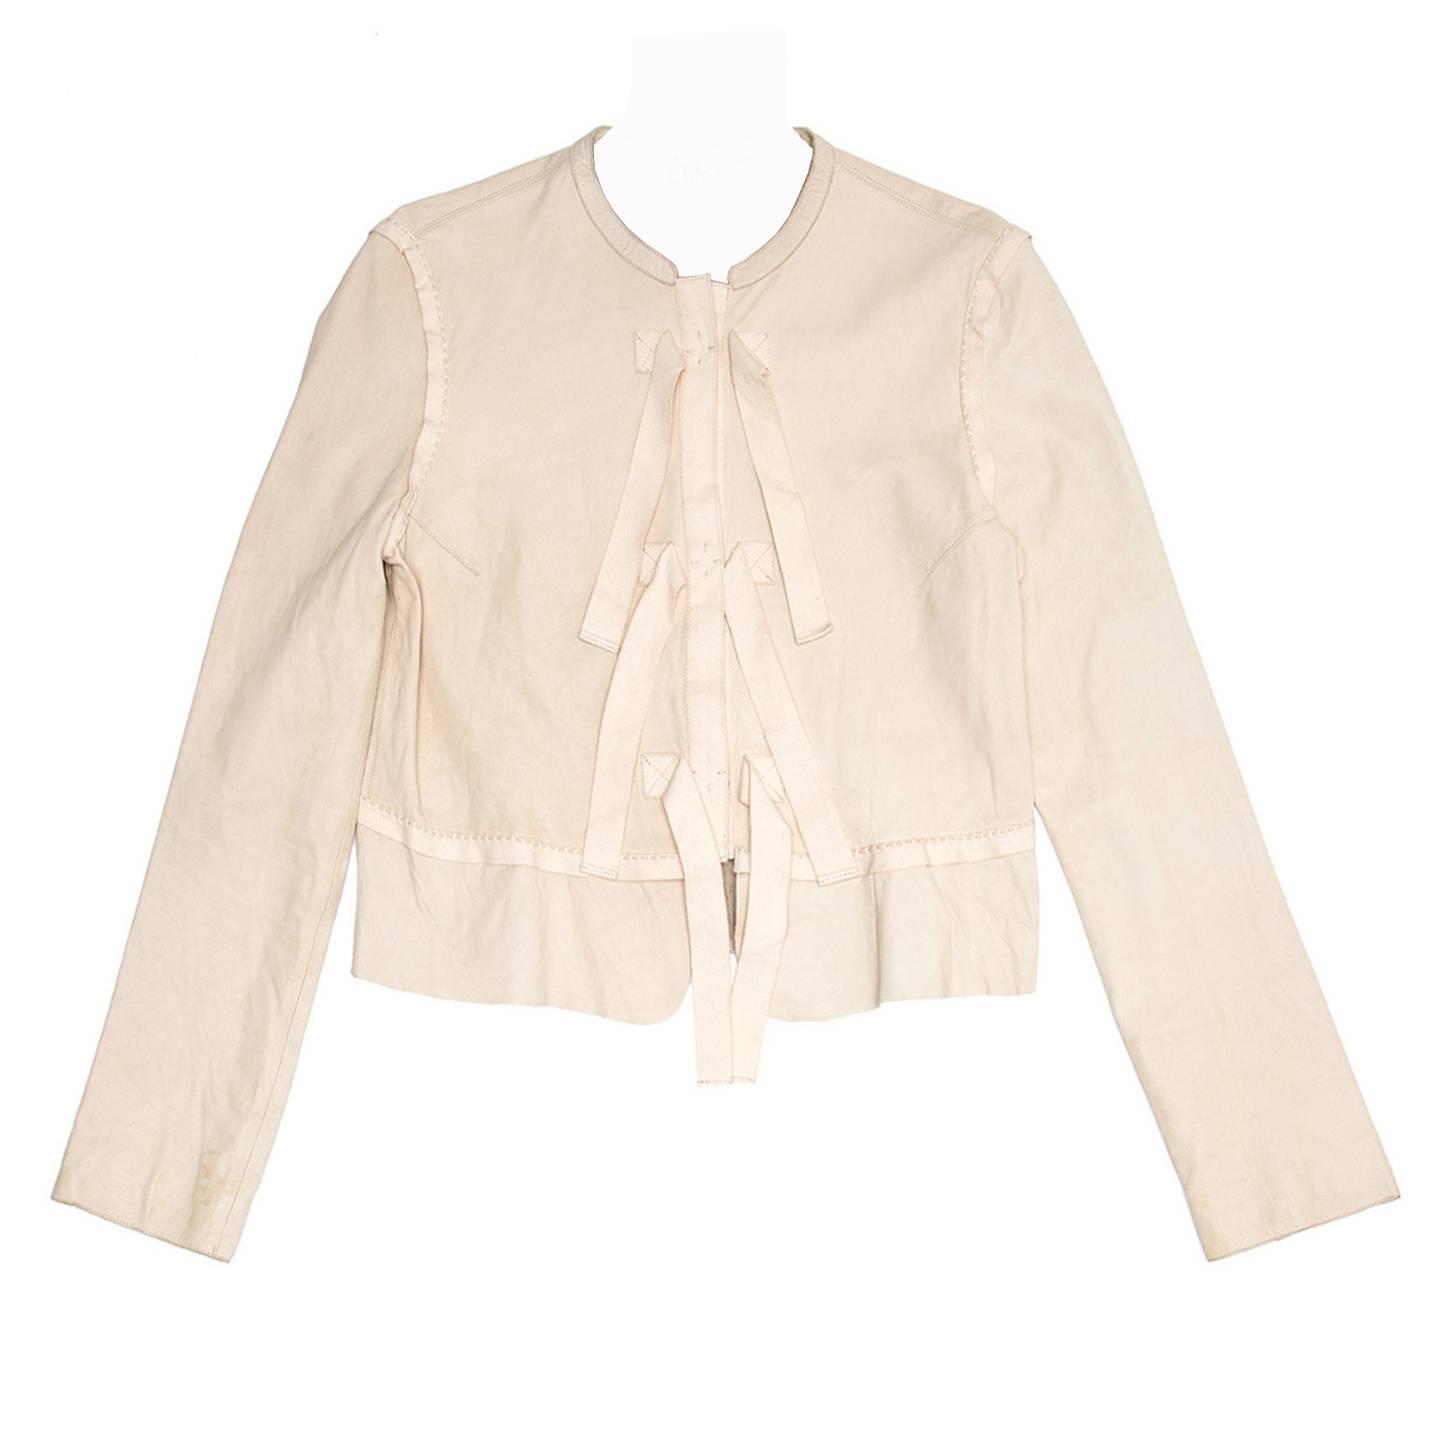 Chloe' Dusty Pink Leather Jacket For Sale at 1stdibs